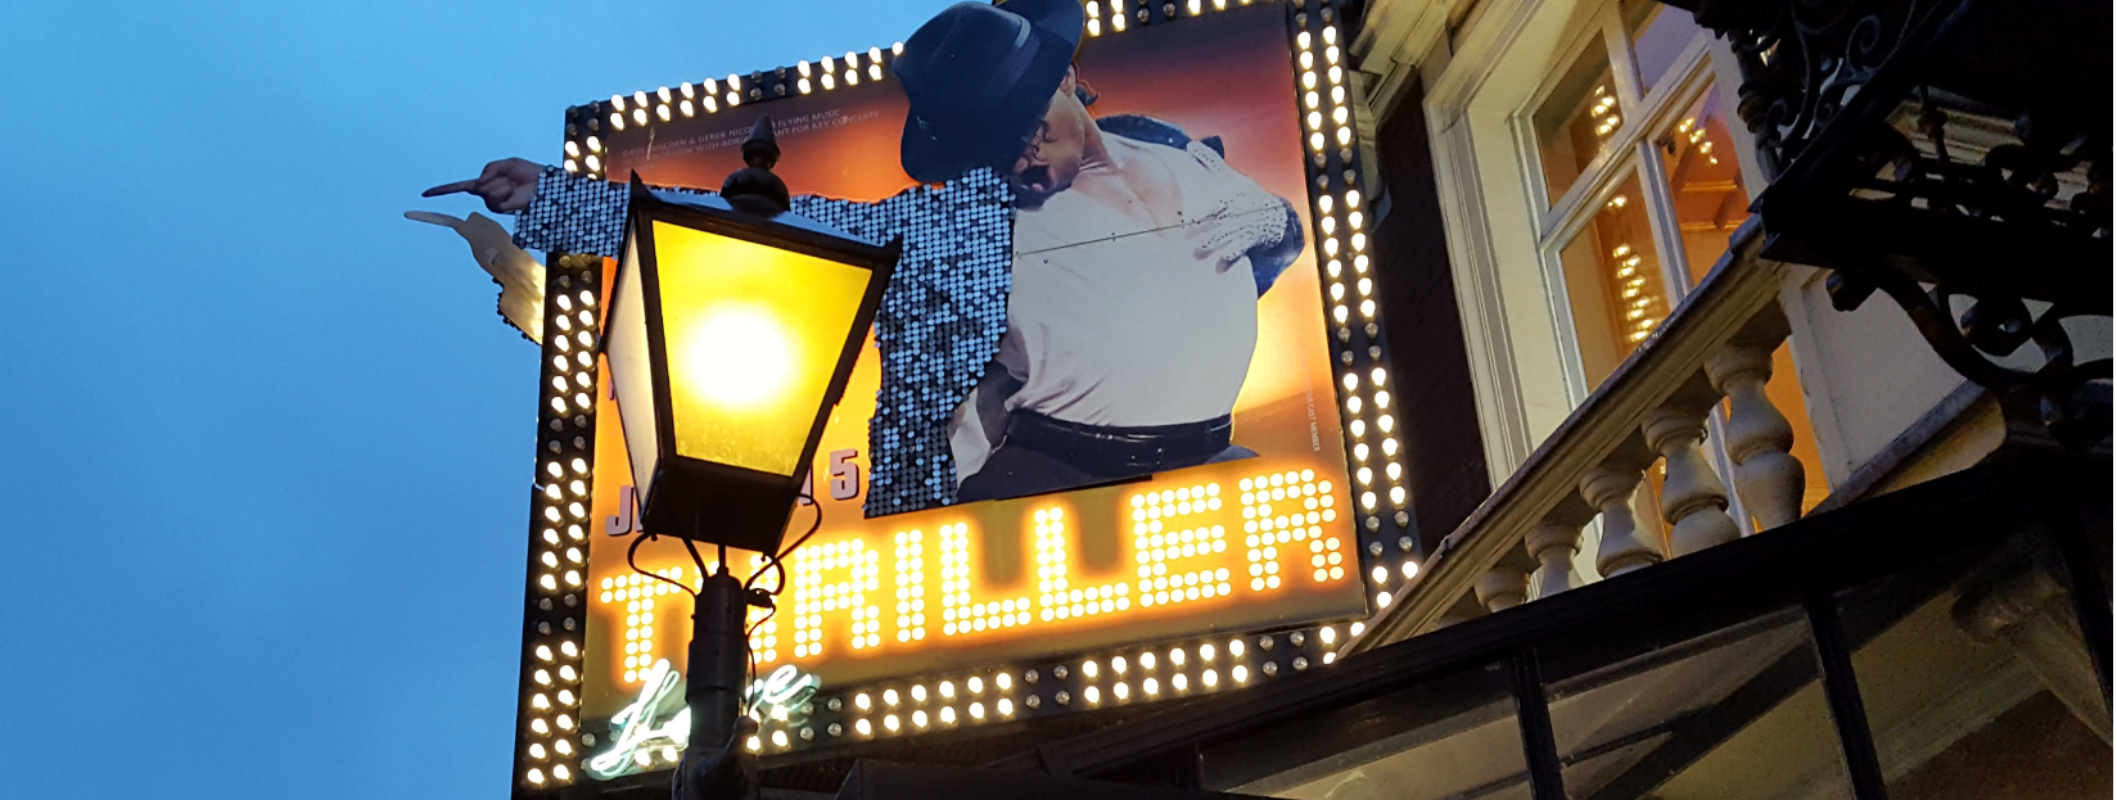 image of theatre sign - advertising Micheal Jacksons Thriller